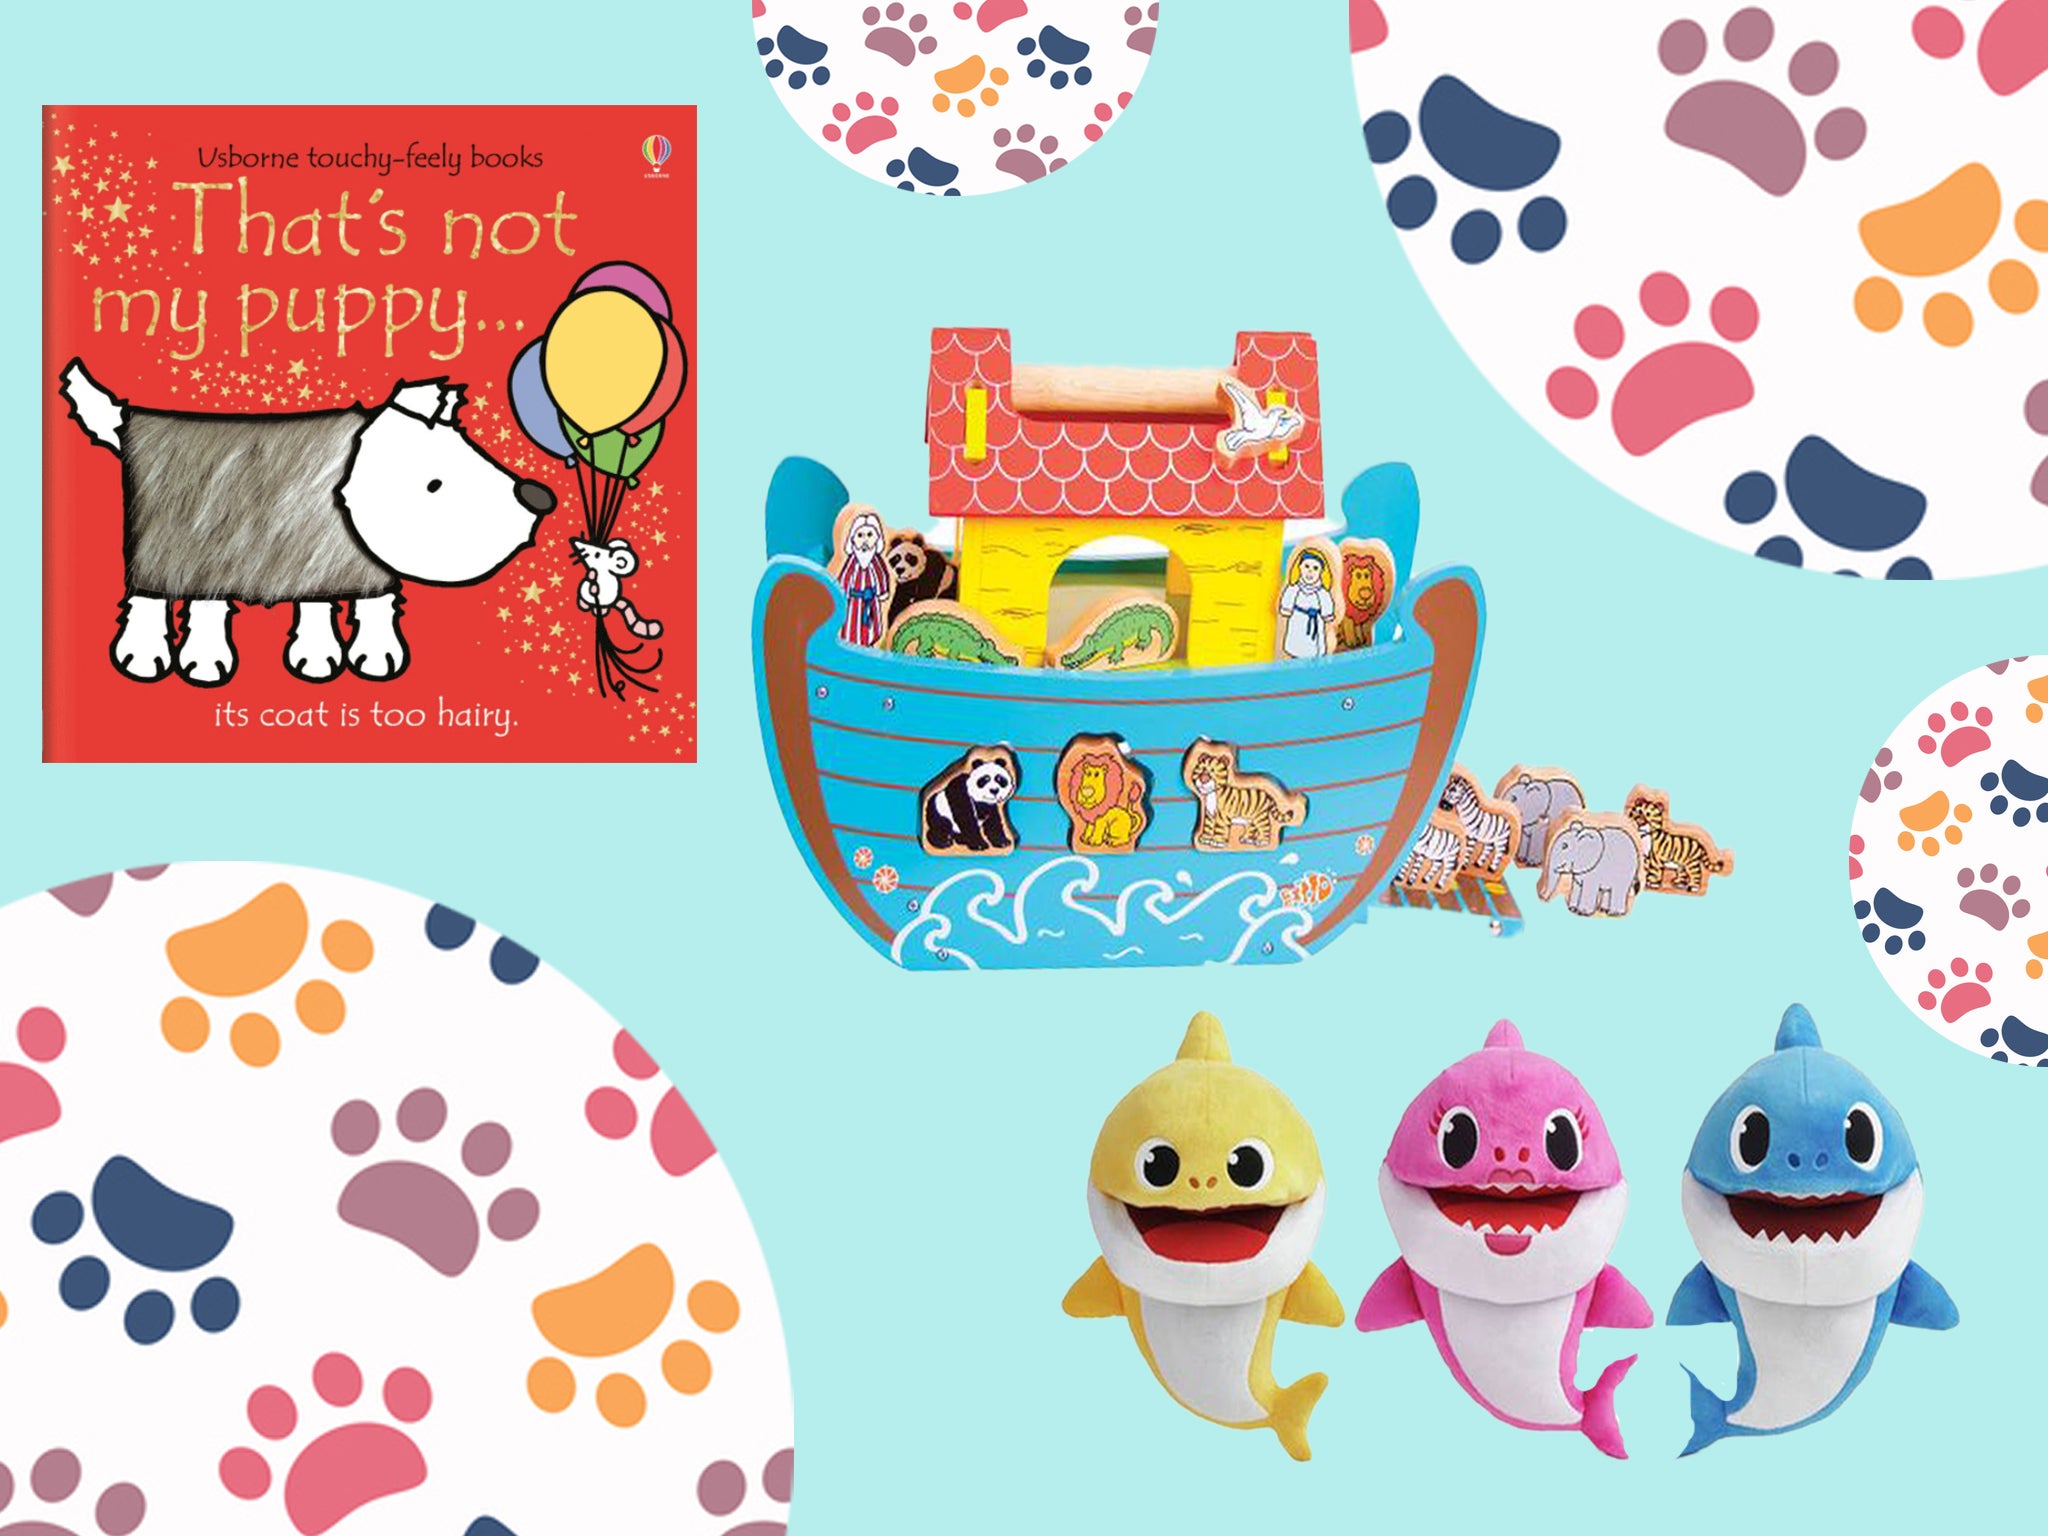 Christmas gift ideas for kids love animals: Books, teddies, interactive  toys | The Independent